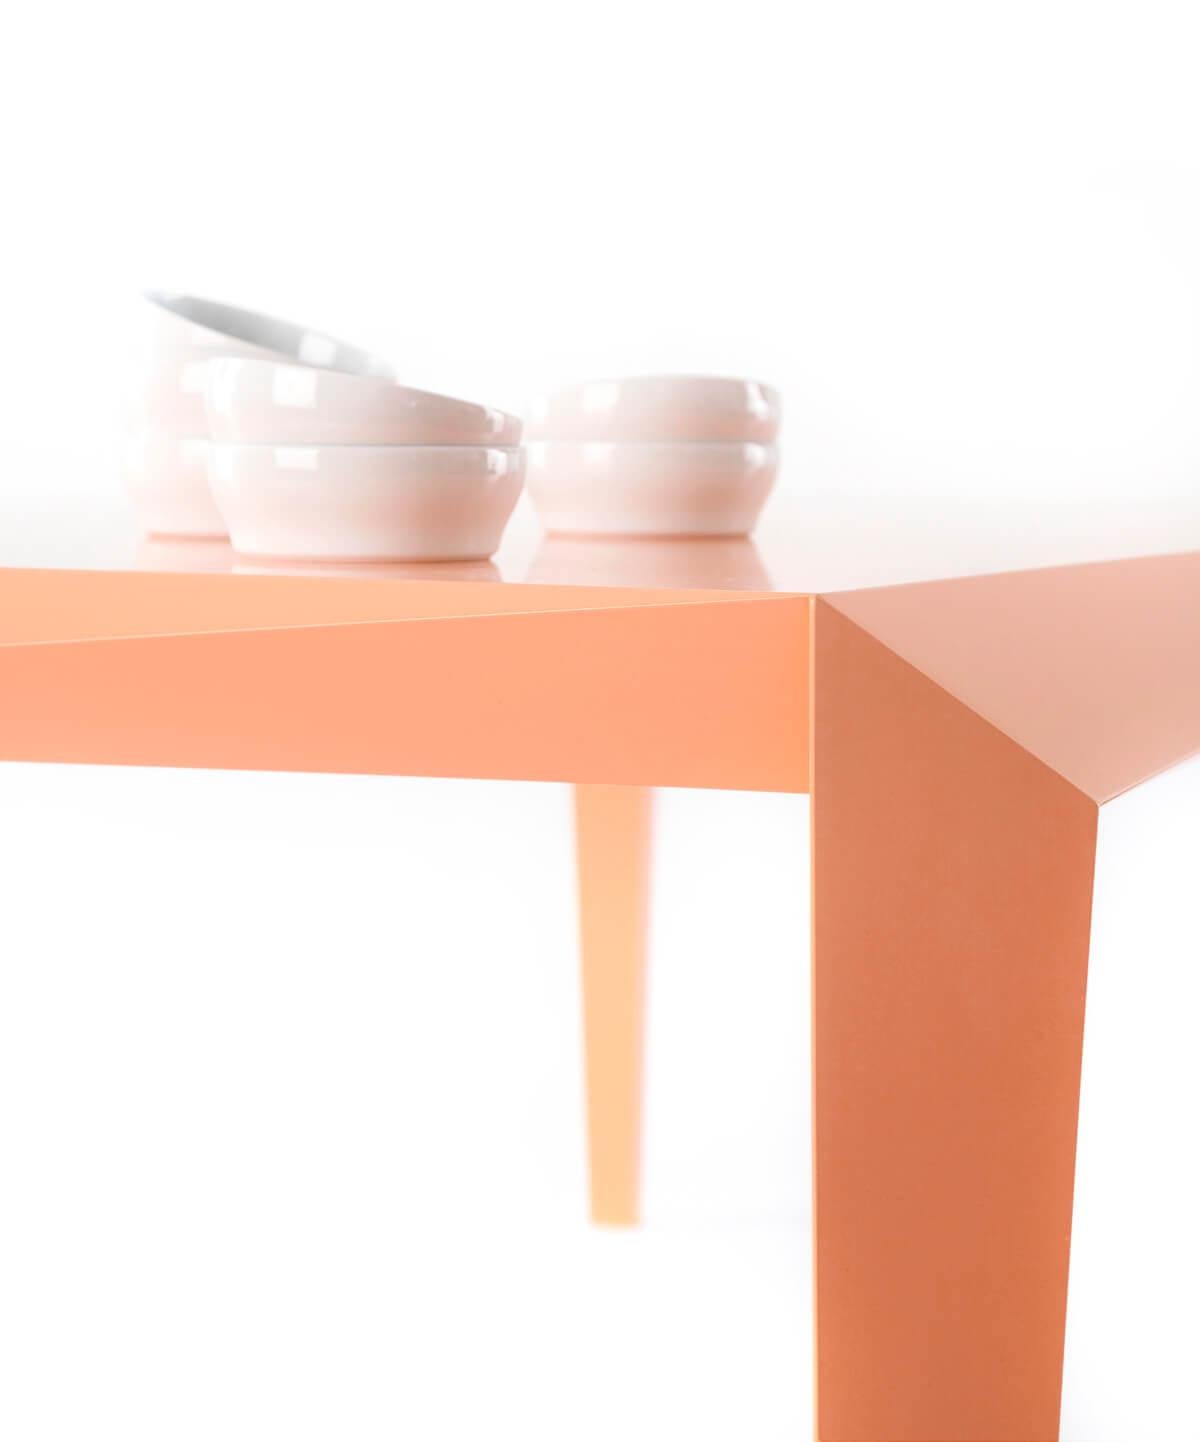 Dutch Faceted, Geometric Volt Dining Table, 'Salmon Pink' by Reinier De Jong For Sale